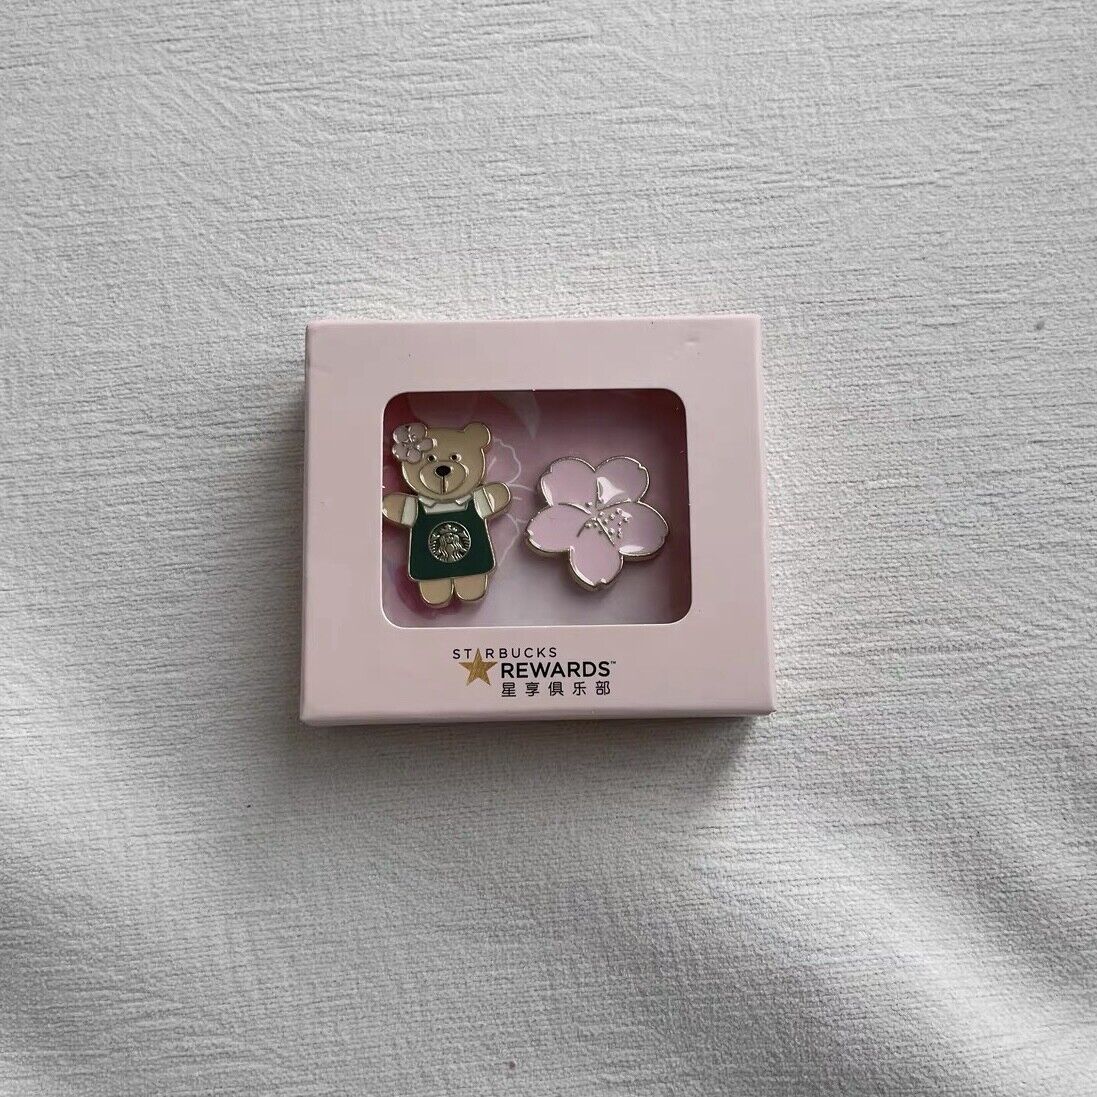 Starbucks 2019 coffee Cherry blossom and bears 2/3/7 pins set Limited Edition